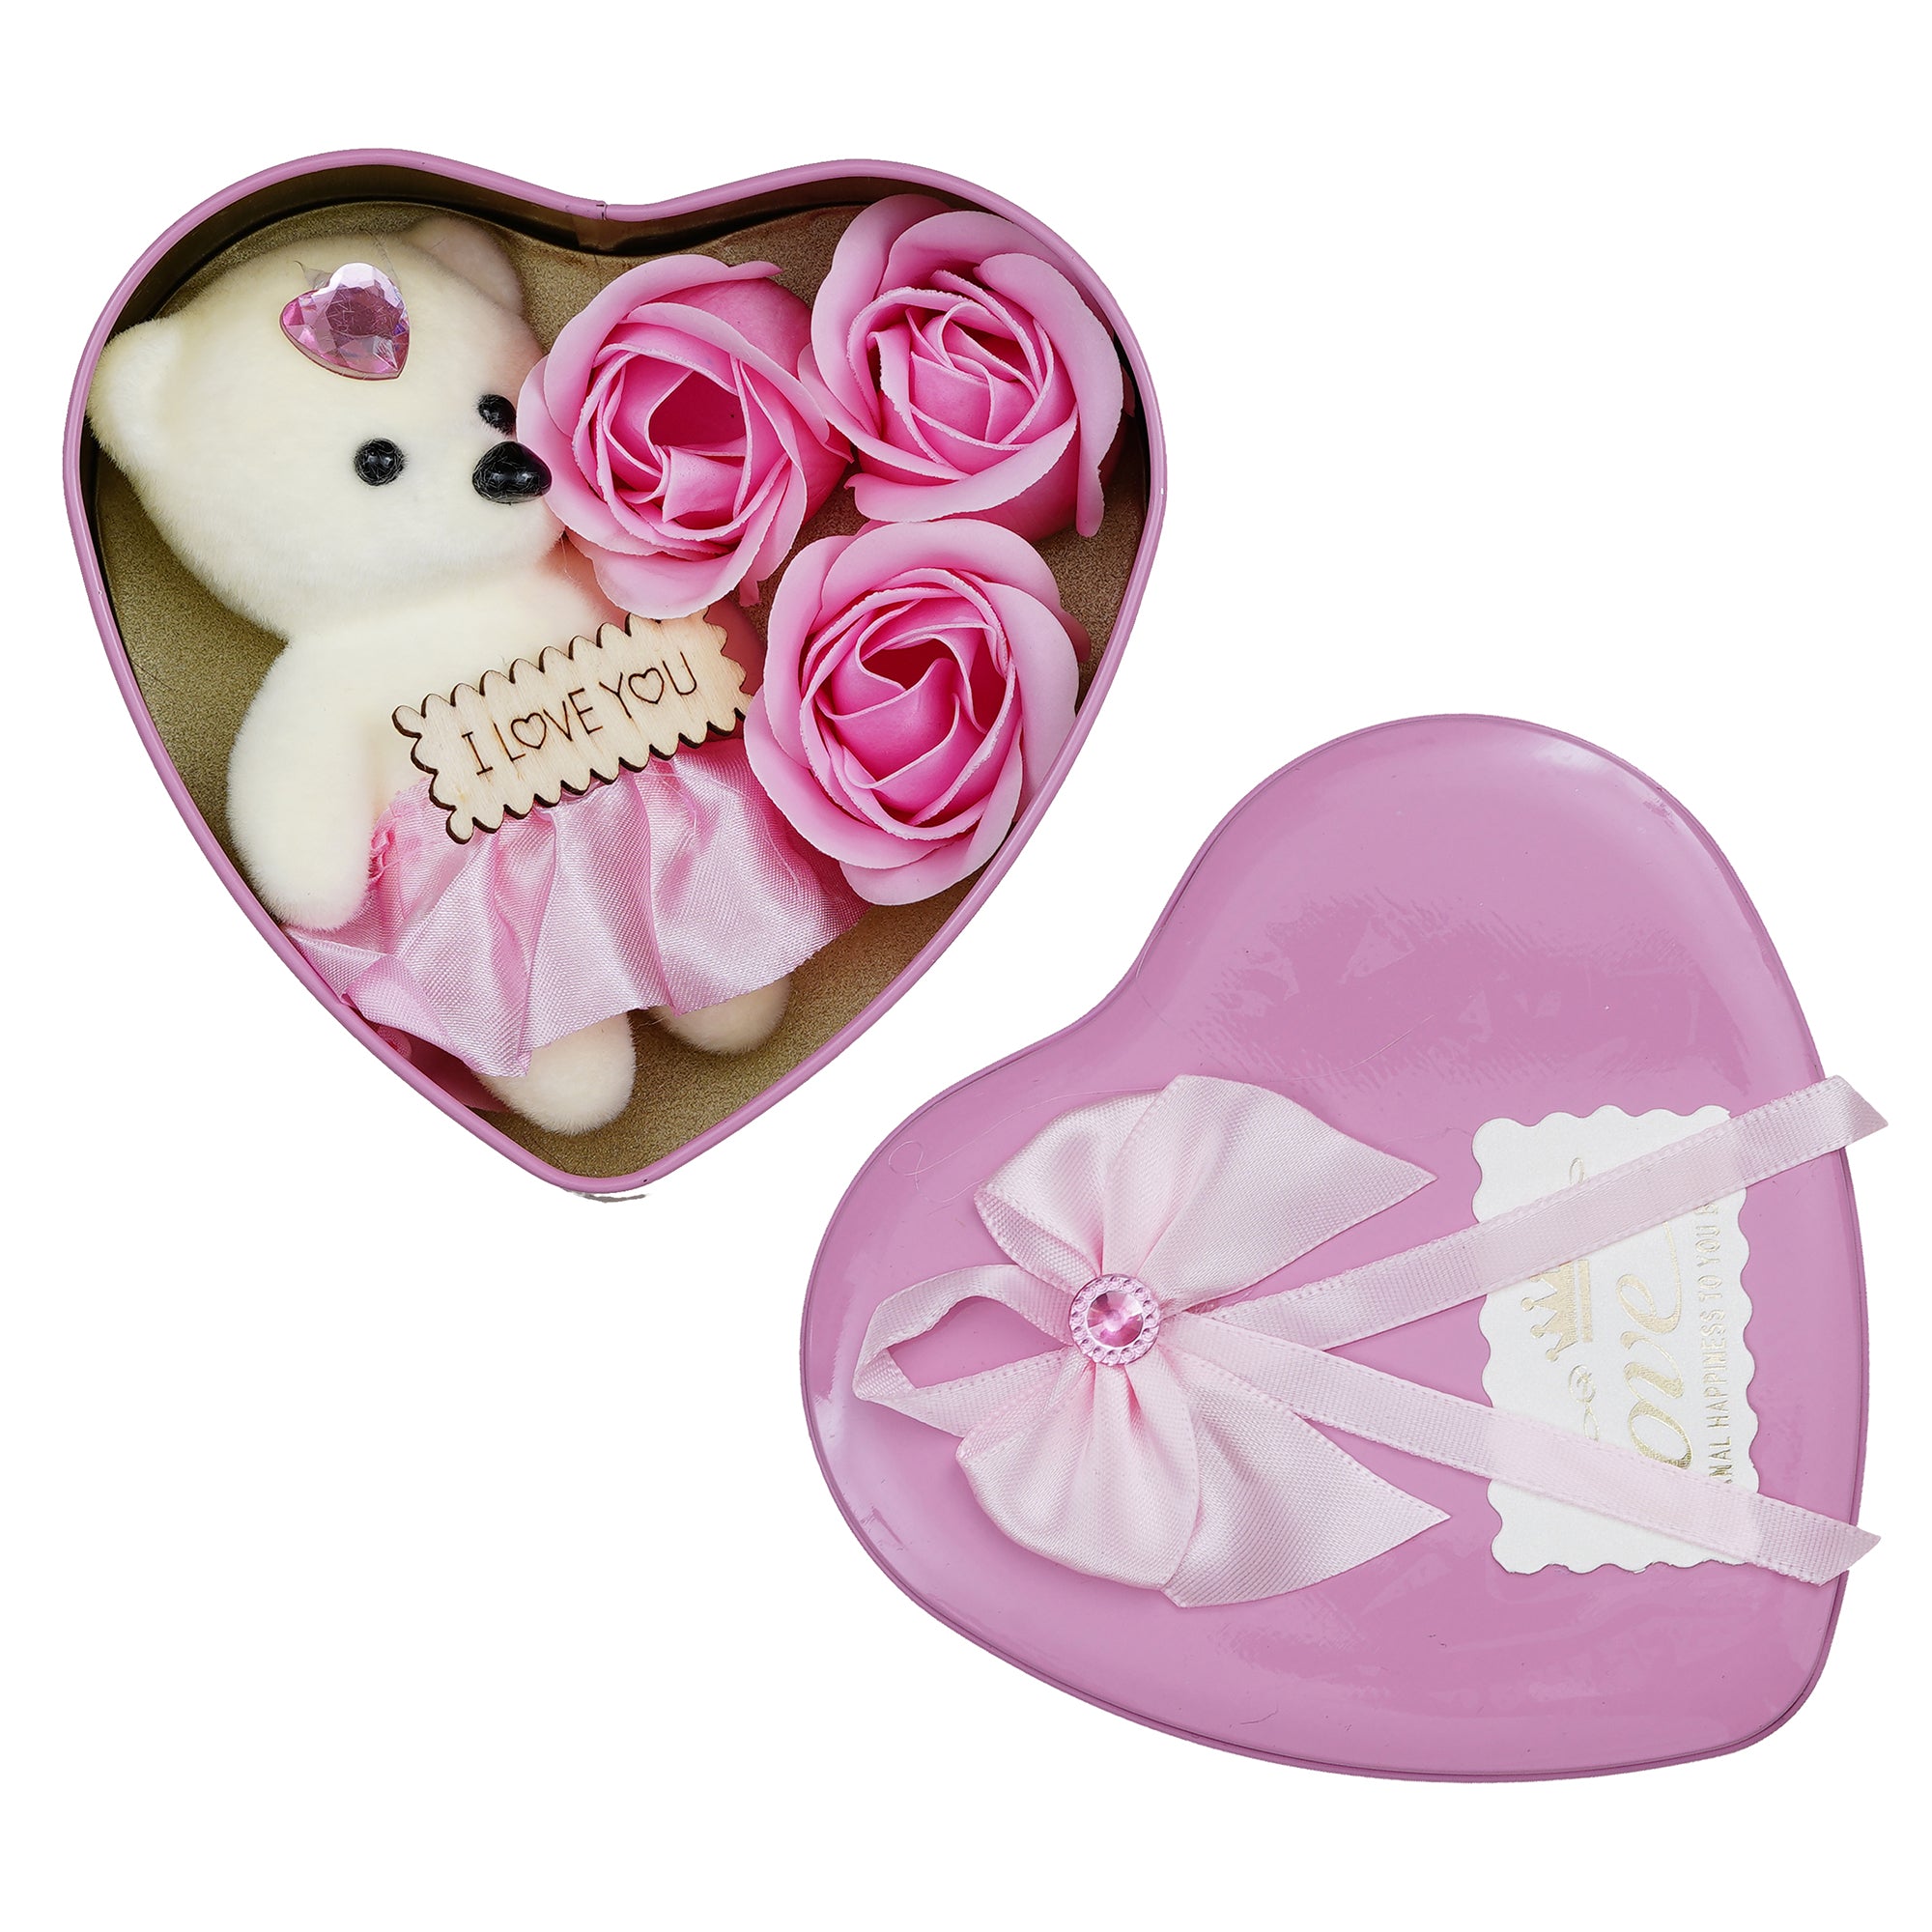 Pink Heart Shaped Gift Box with 3 Pink Roses, Teddy Bear and a Card 3